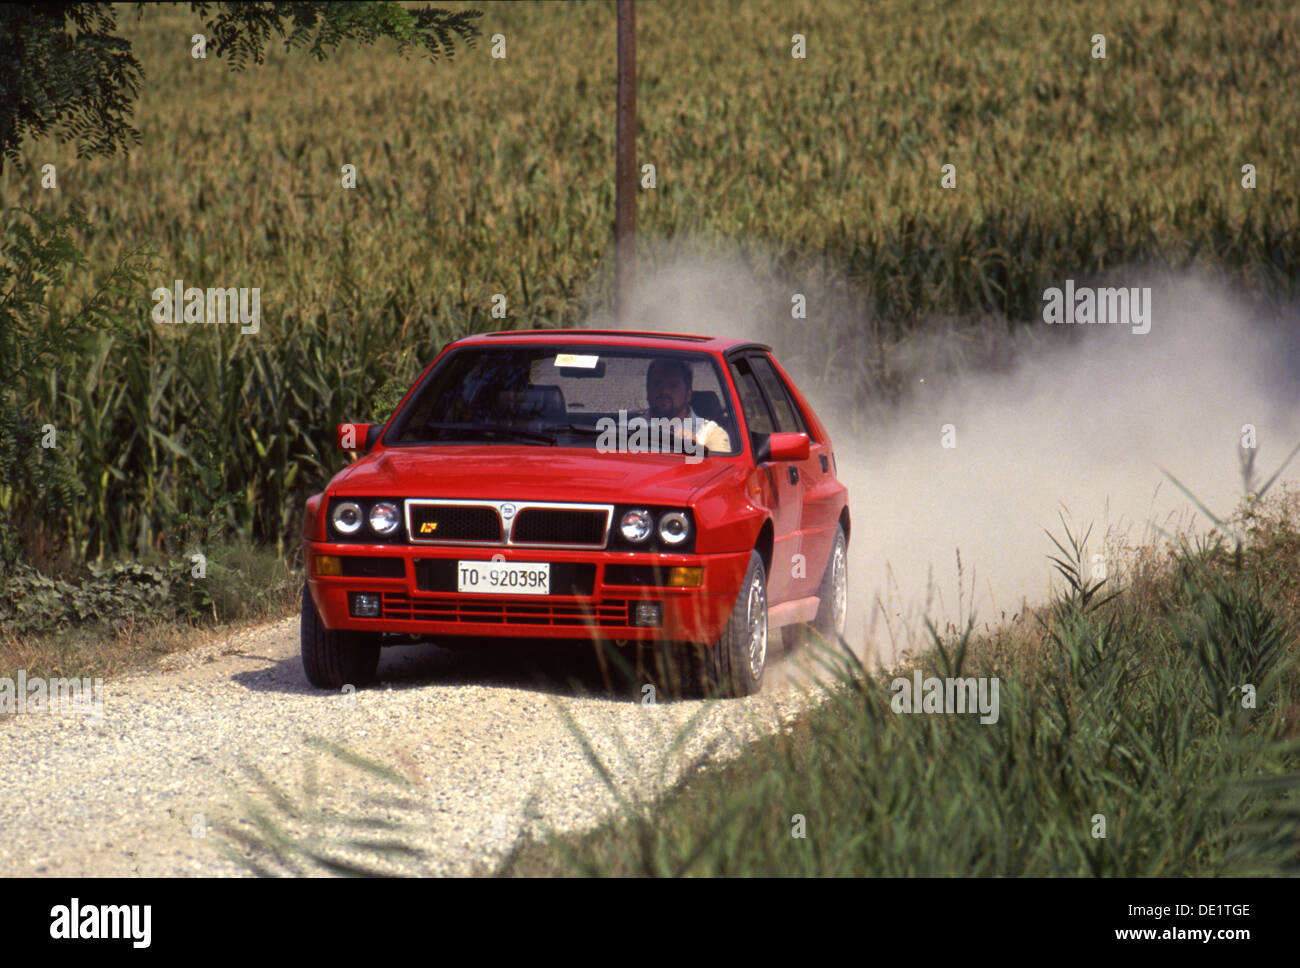 Lancia Delta Integrale HF Sports Car 4x4 4WD 1990s - driving through gravel dust trailling Stock Photo